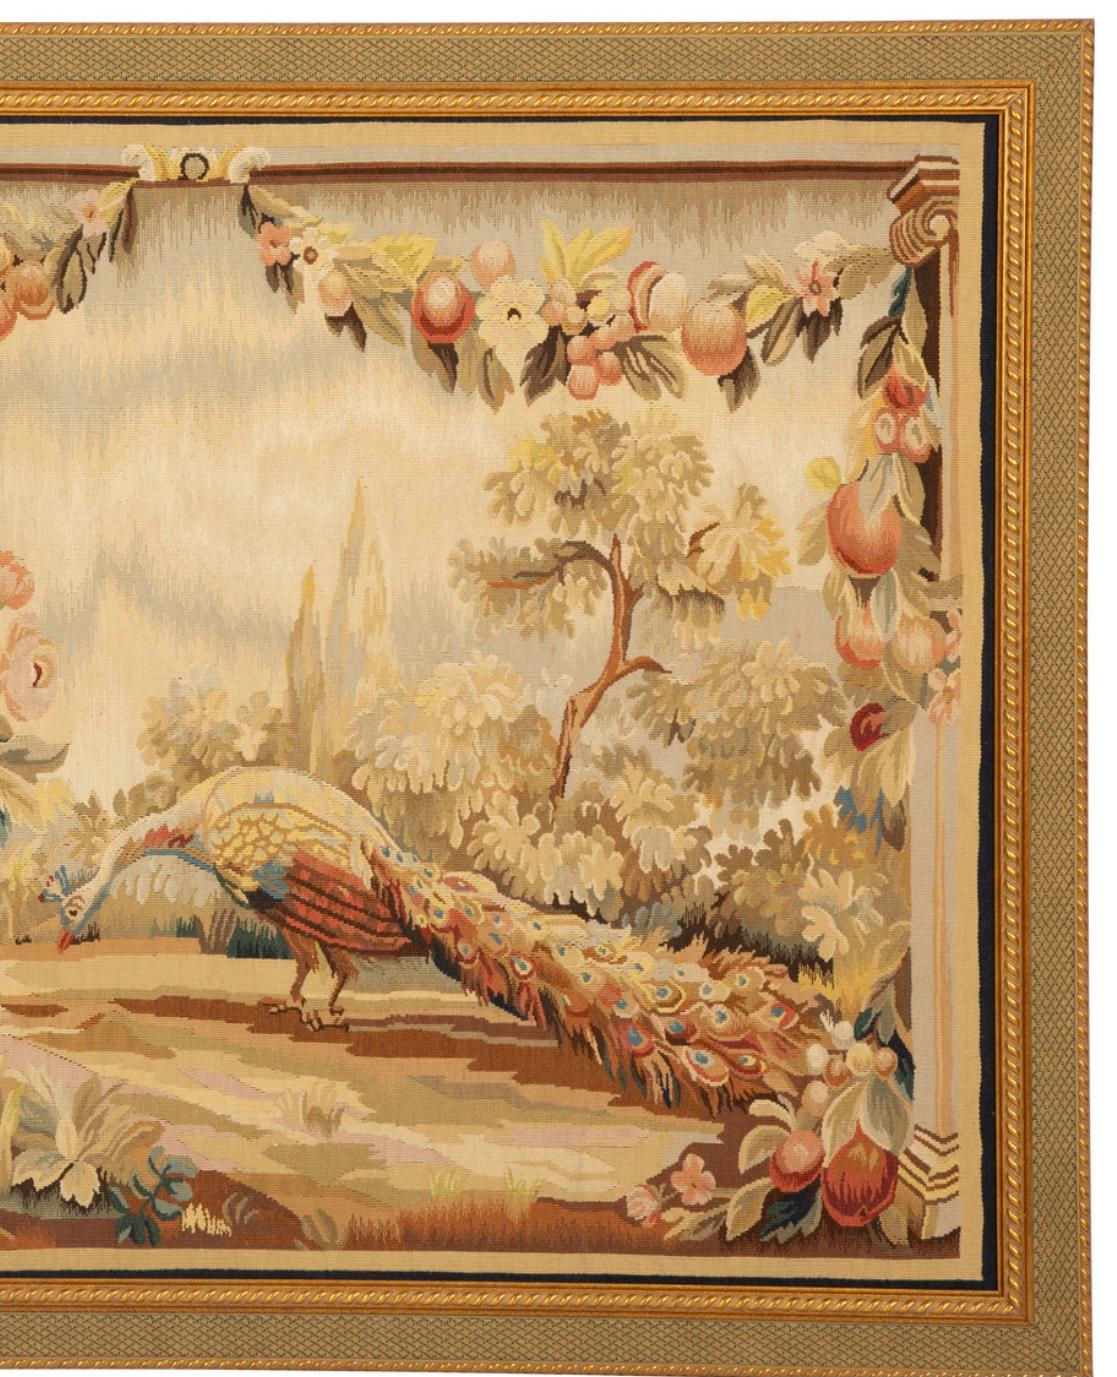 French Aubusson tapestry with a peacock in a wooded landscape next to an urn of flowers. Swags of flowers along the top in shades of pale red, greens and browns. and framed in a gold giltwood frame. Framed and ready to hang.